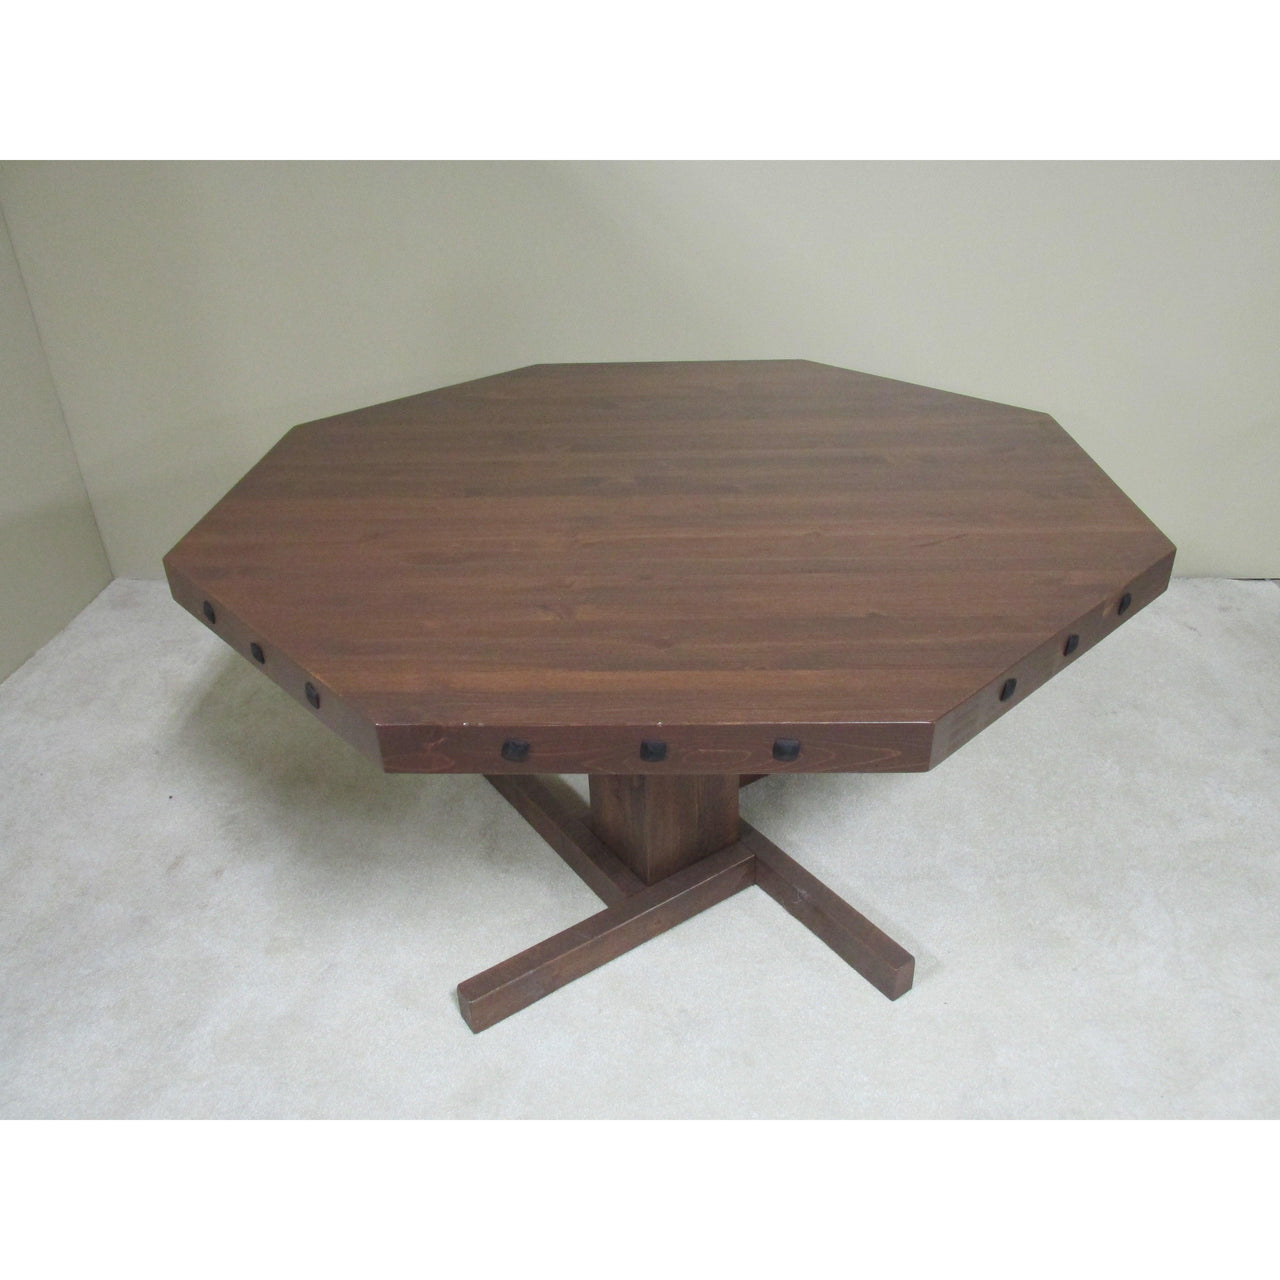 Viking Log Poker & Dining Table Set Barnwood with Matching Wood Seat Chairs-AMERICANA-POKER-TABLES